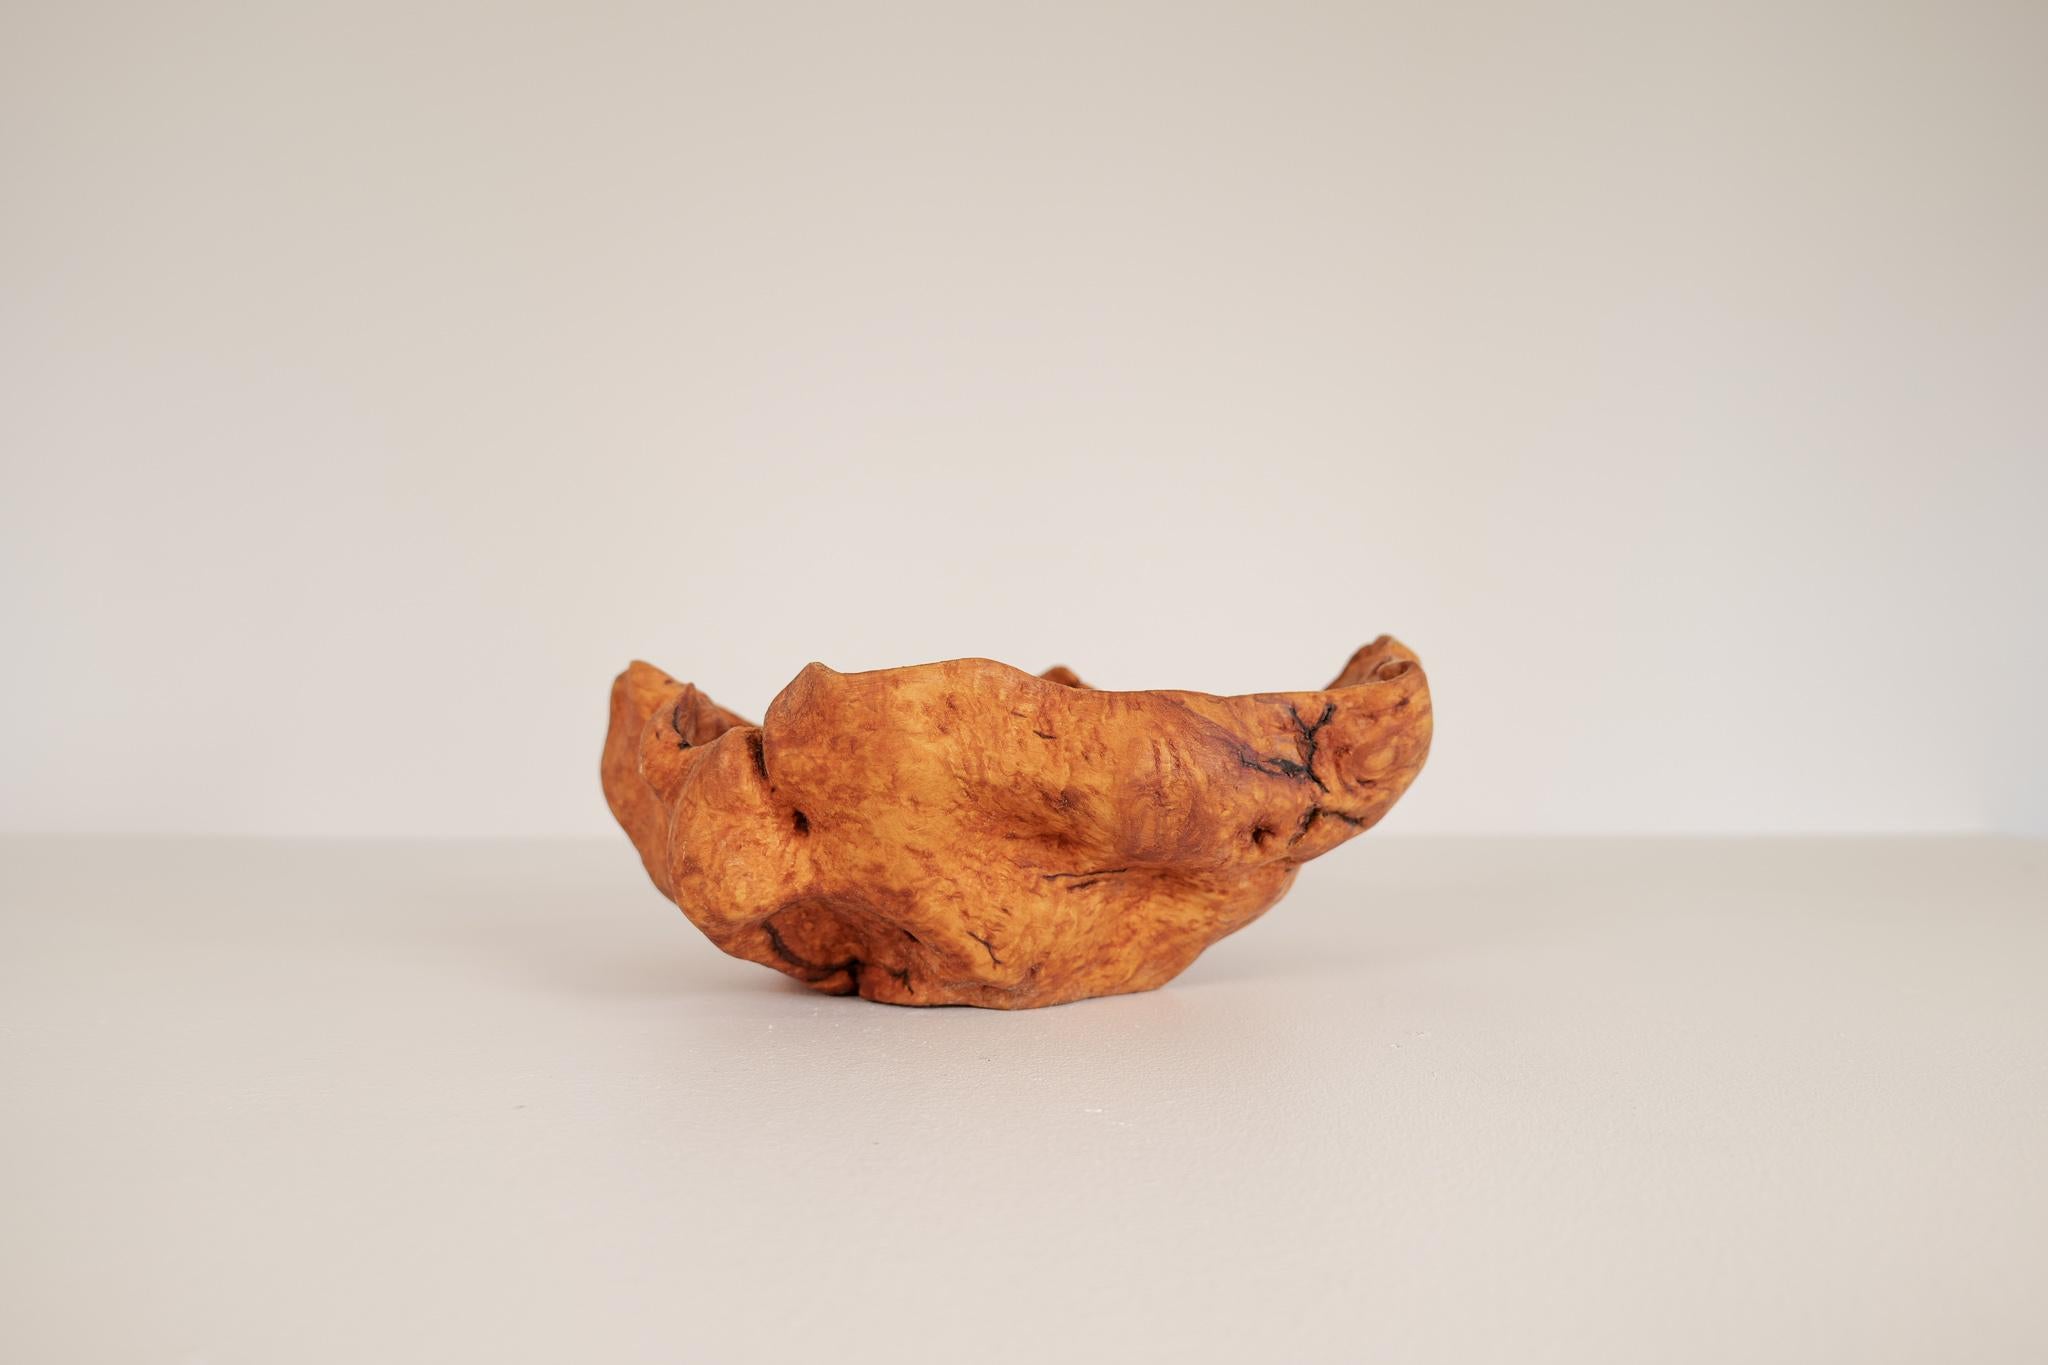 This large burl made in Sweden with precision handcraft gives a nice edition to any living room with intention to give an organic simple, but jet complex look. The signs of the wood structure and life are clearly visible. 

Good vintage